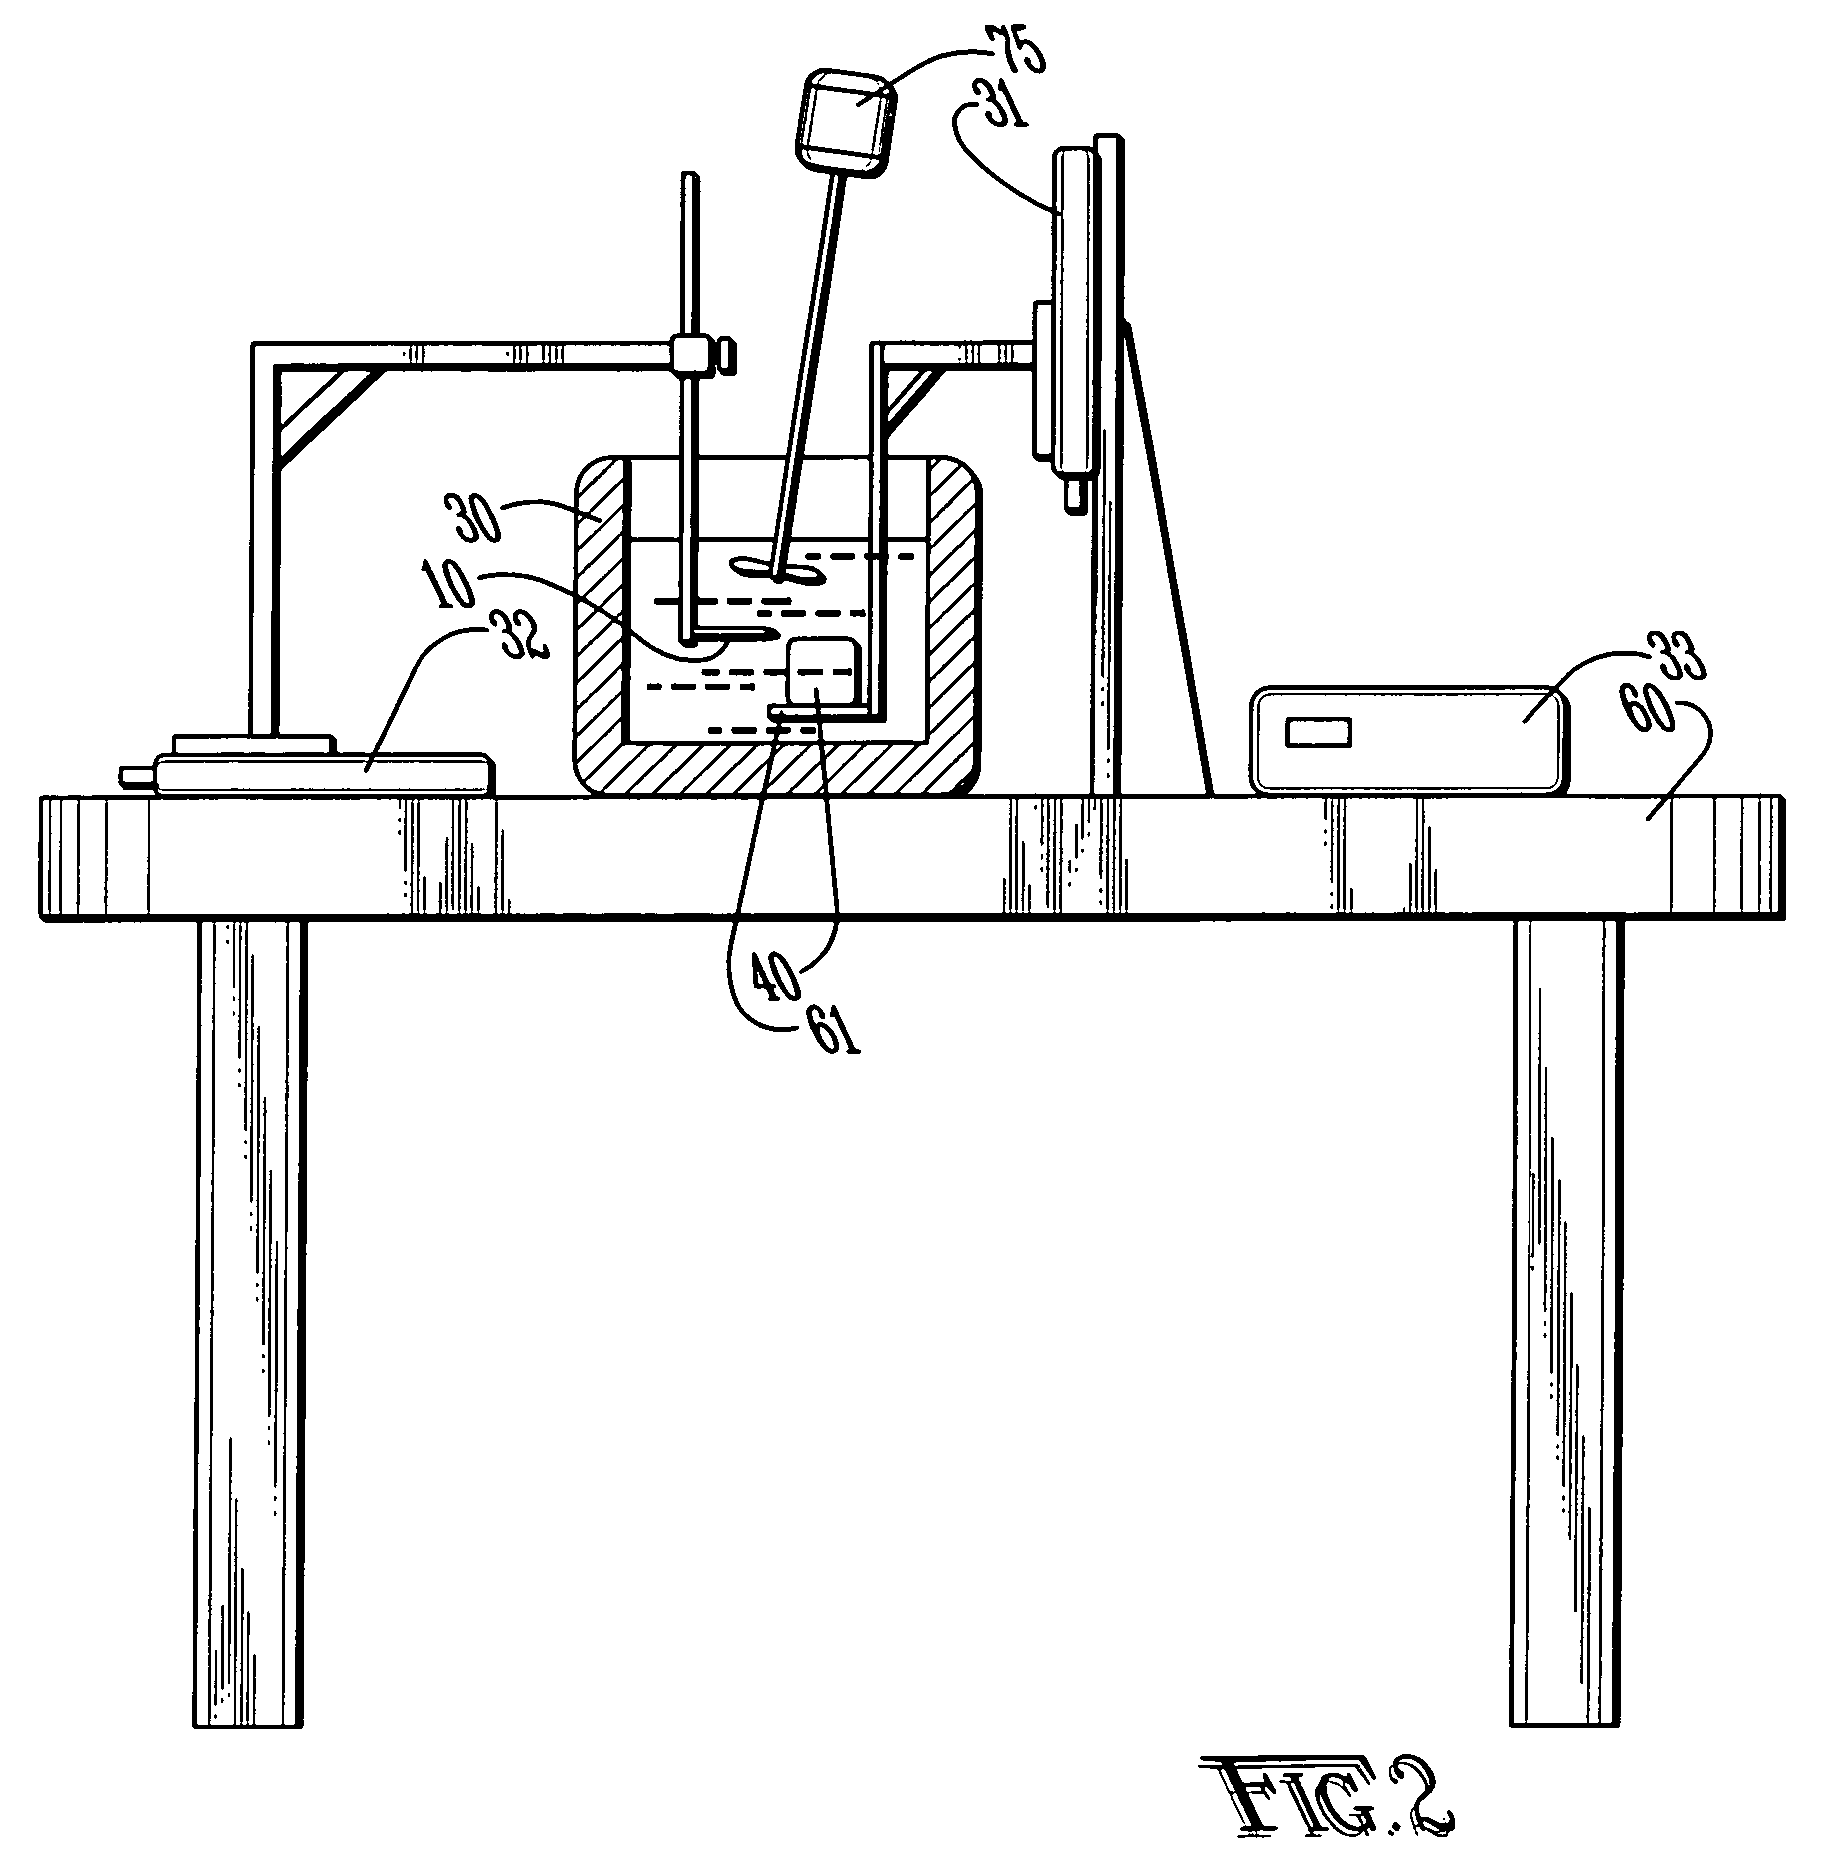 Tissue electro-sectioning apparatus